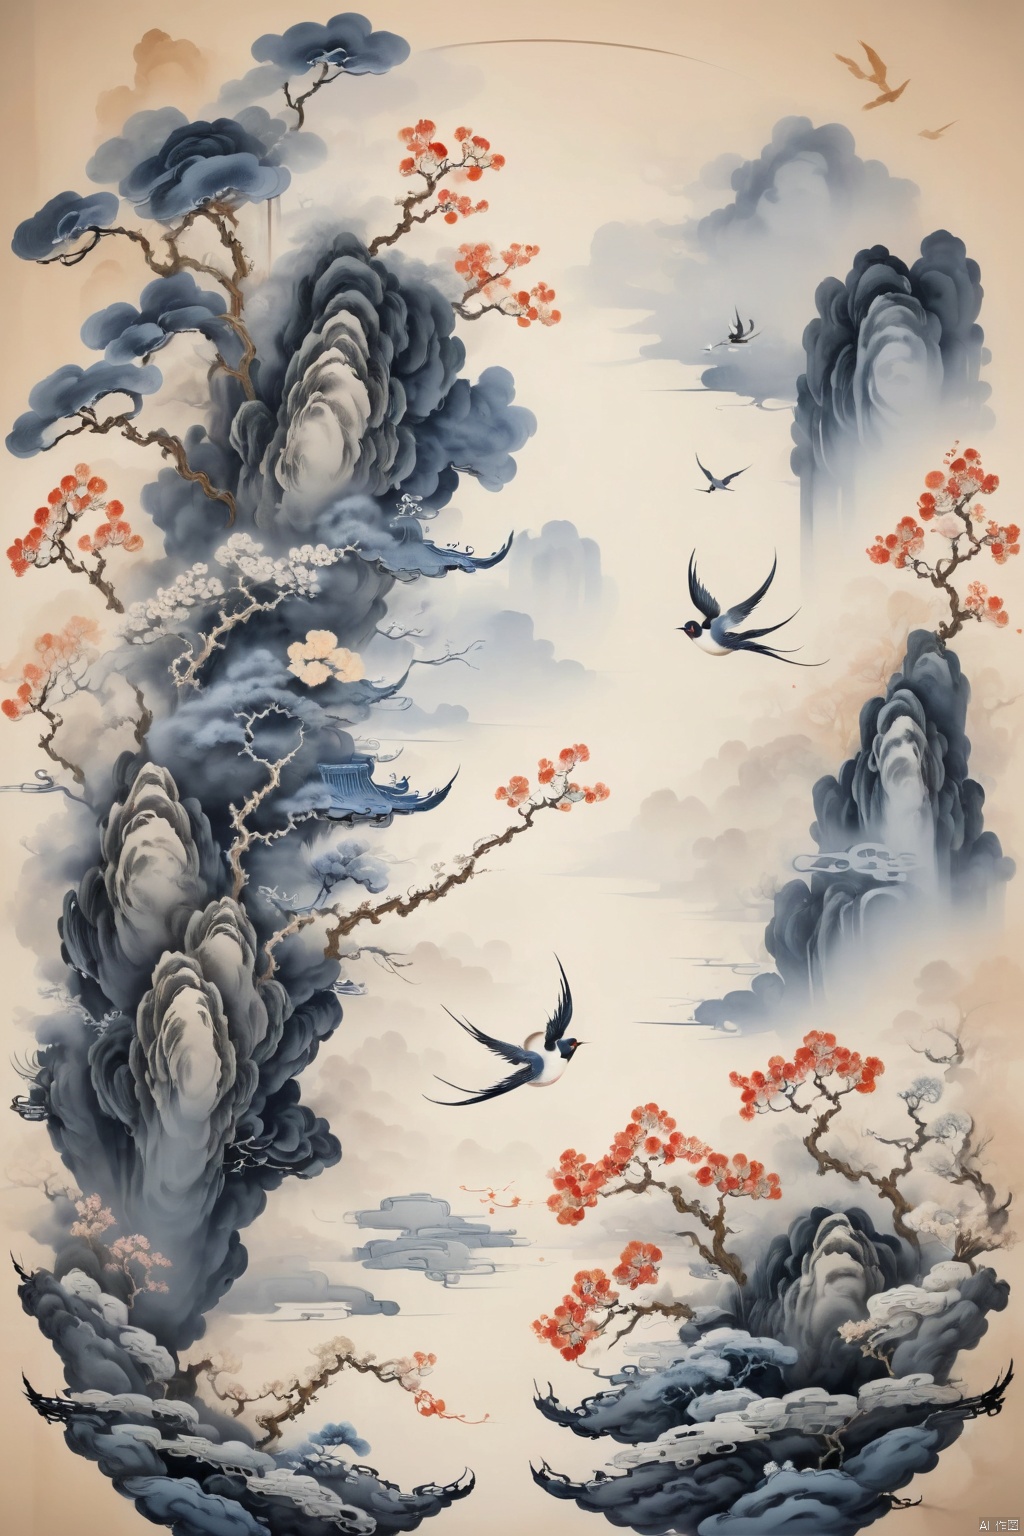 The flowers are always withering, which makes people helpless, and the swallows return again, wandering alone in the flower fragrance path. Chinese ink and wash style